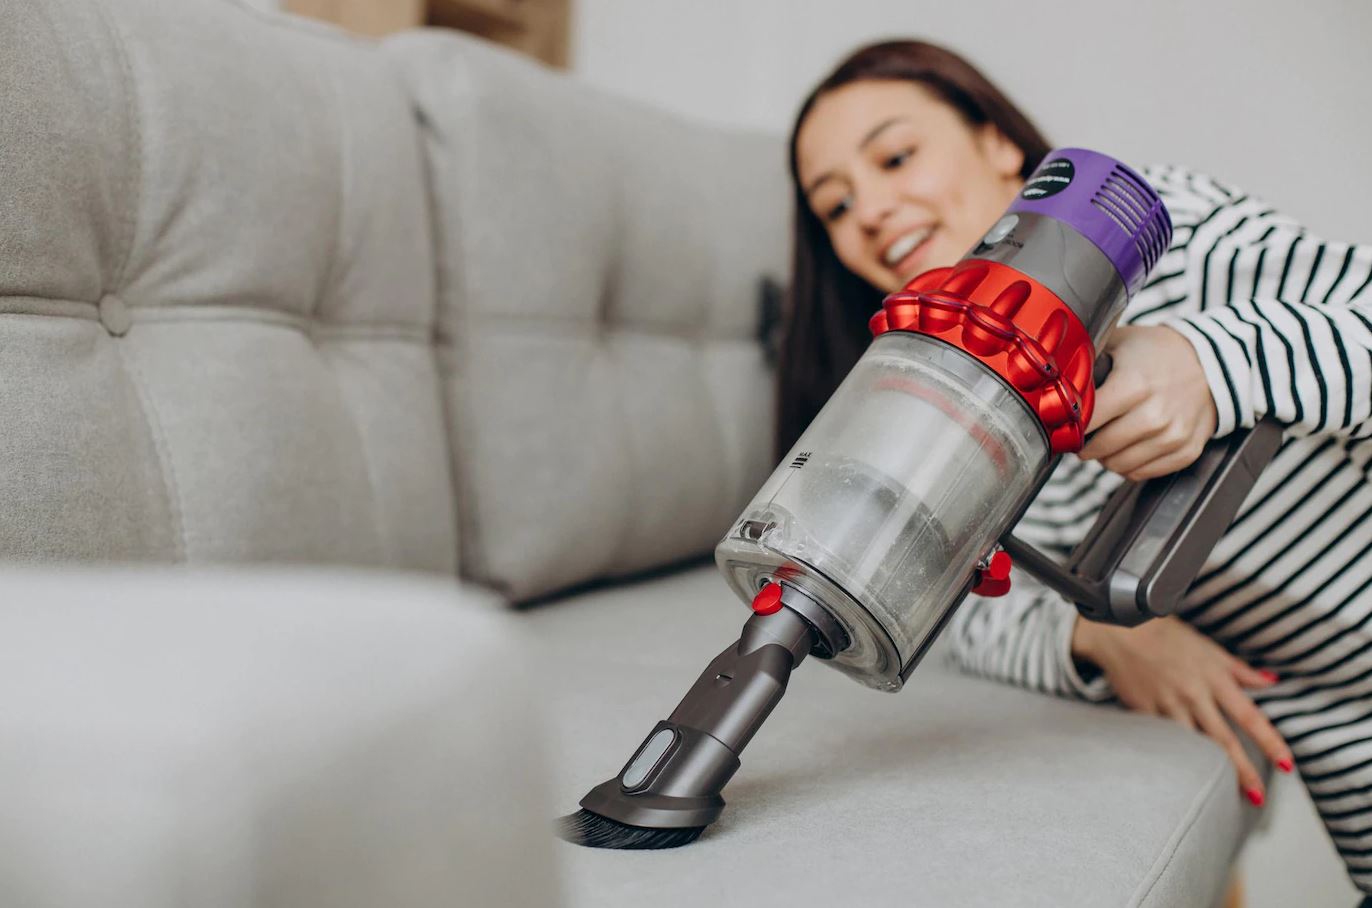 TIPS TO MAINTAIN A HEALTHY VACUUM - Battery Mate